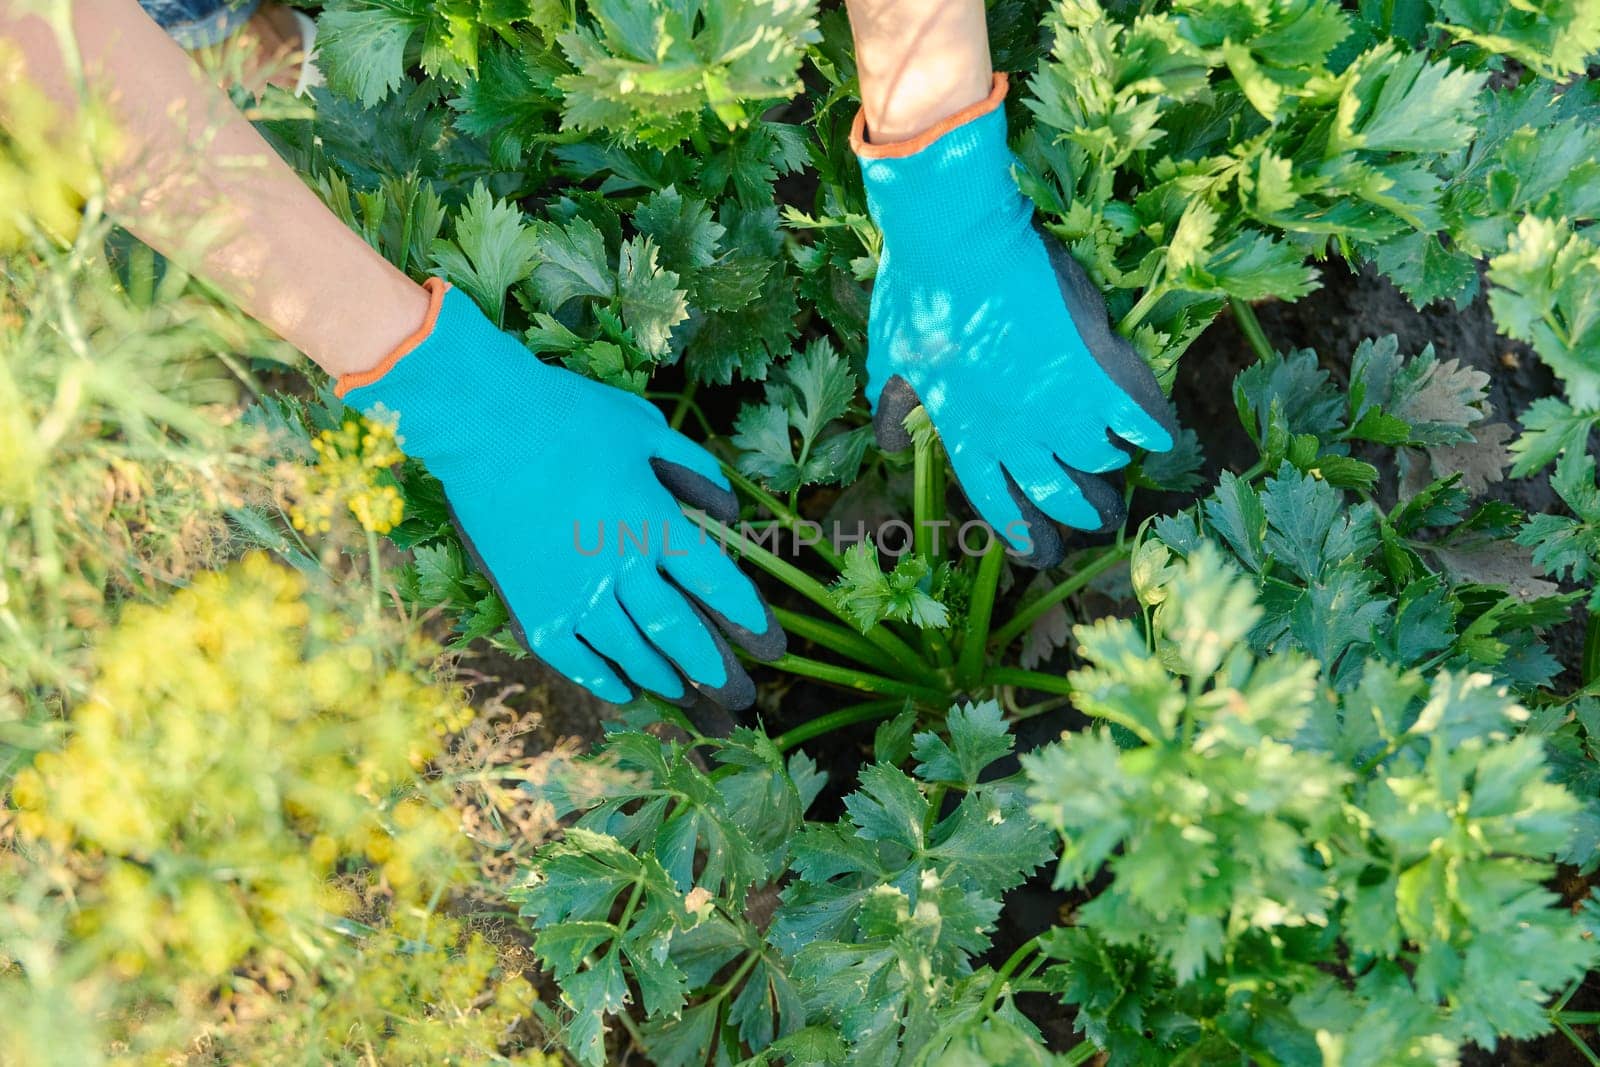 Close-up celery plant growing in a garden bed, farmer's hands showing plant. Agriculture, farmers market, organic vegetables